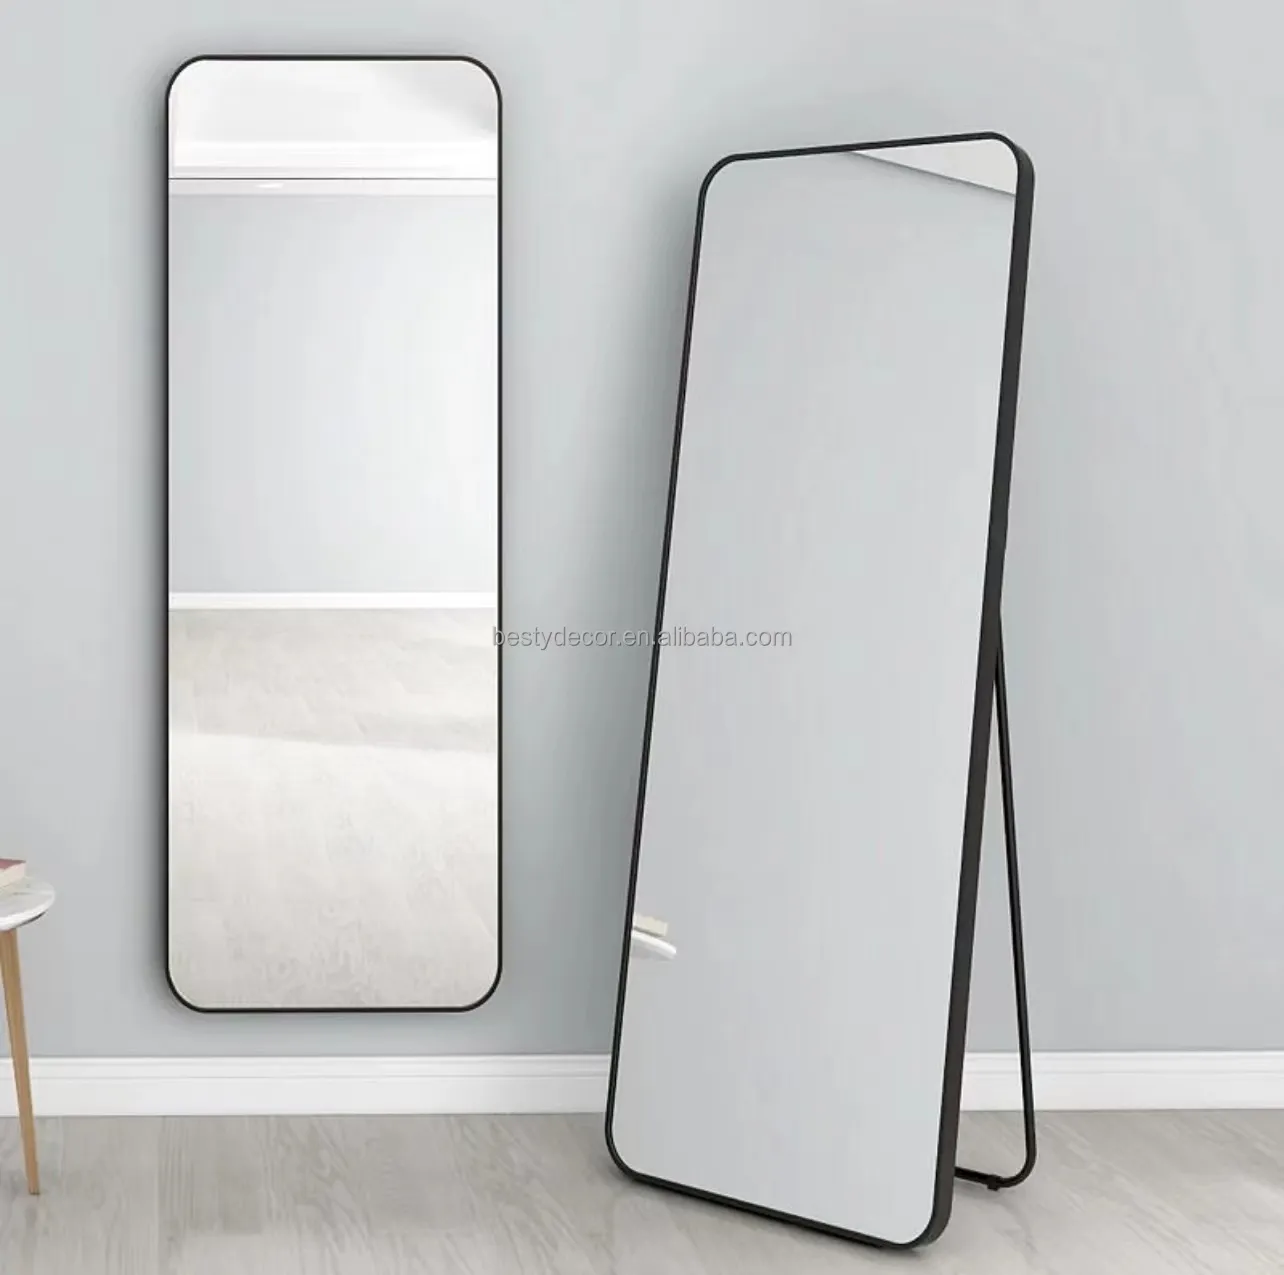 Full Length Standing Floor Anthropologie New cheap Wall Mirror Beauty Home Decorative Dressing Mirrors with Aluminum Frame